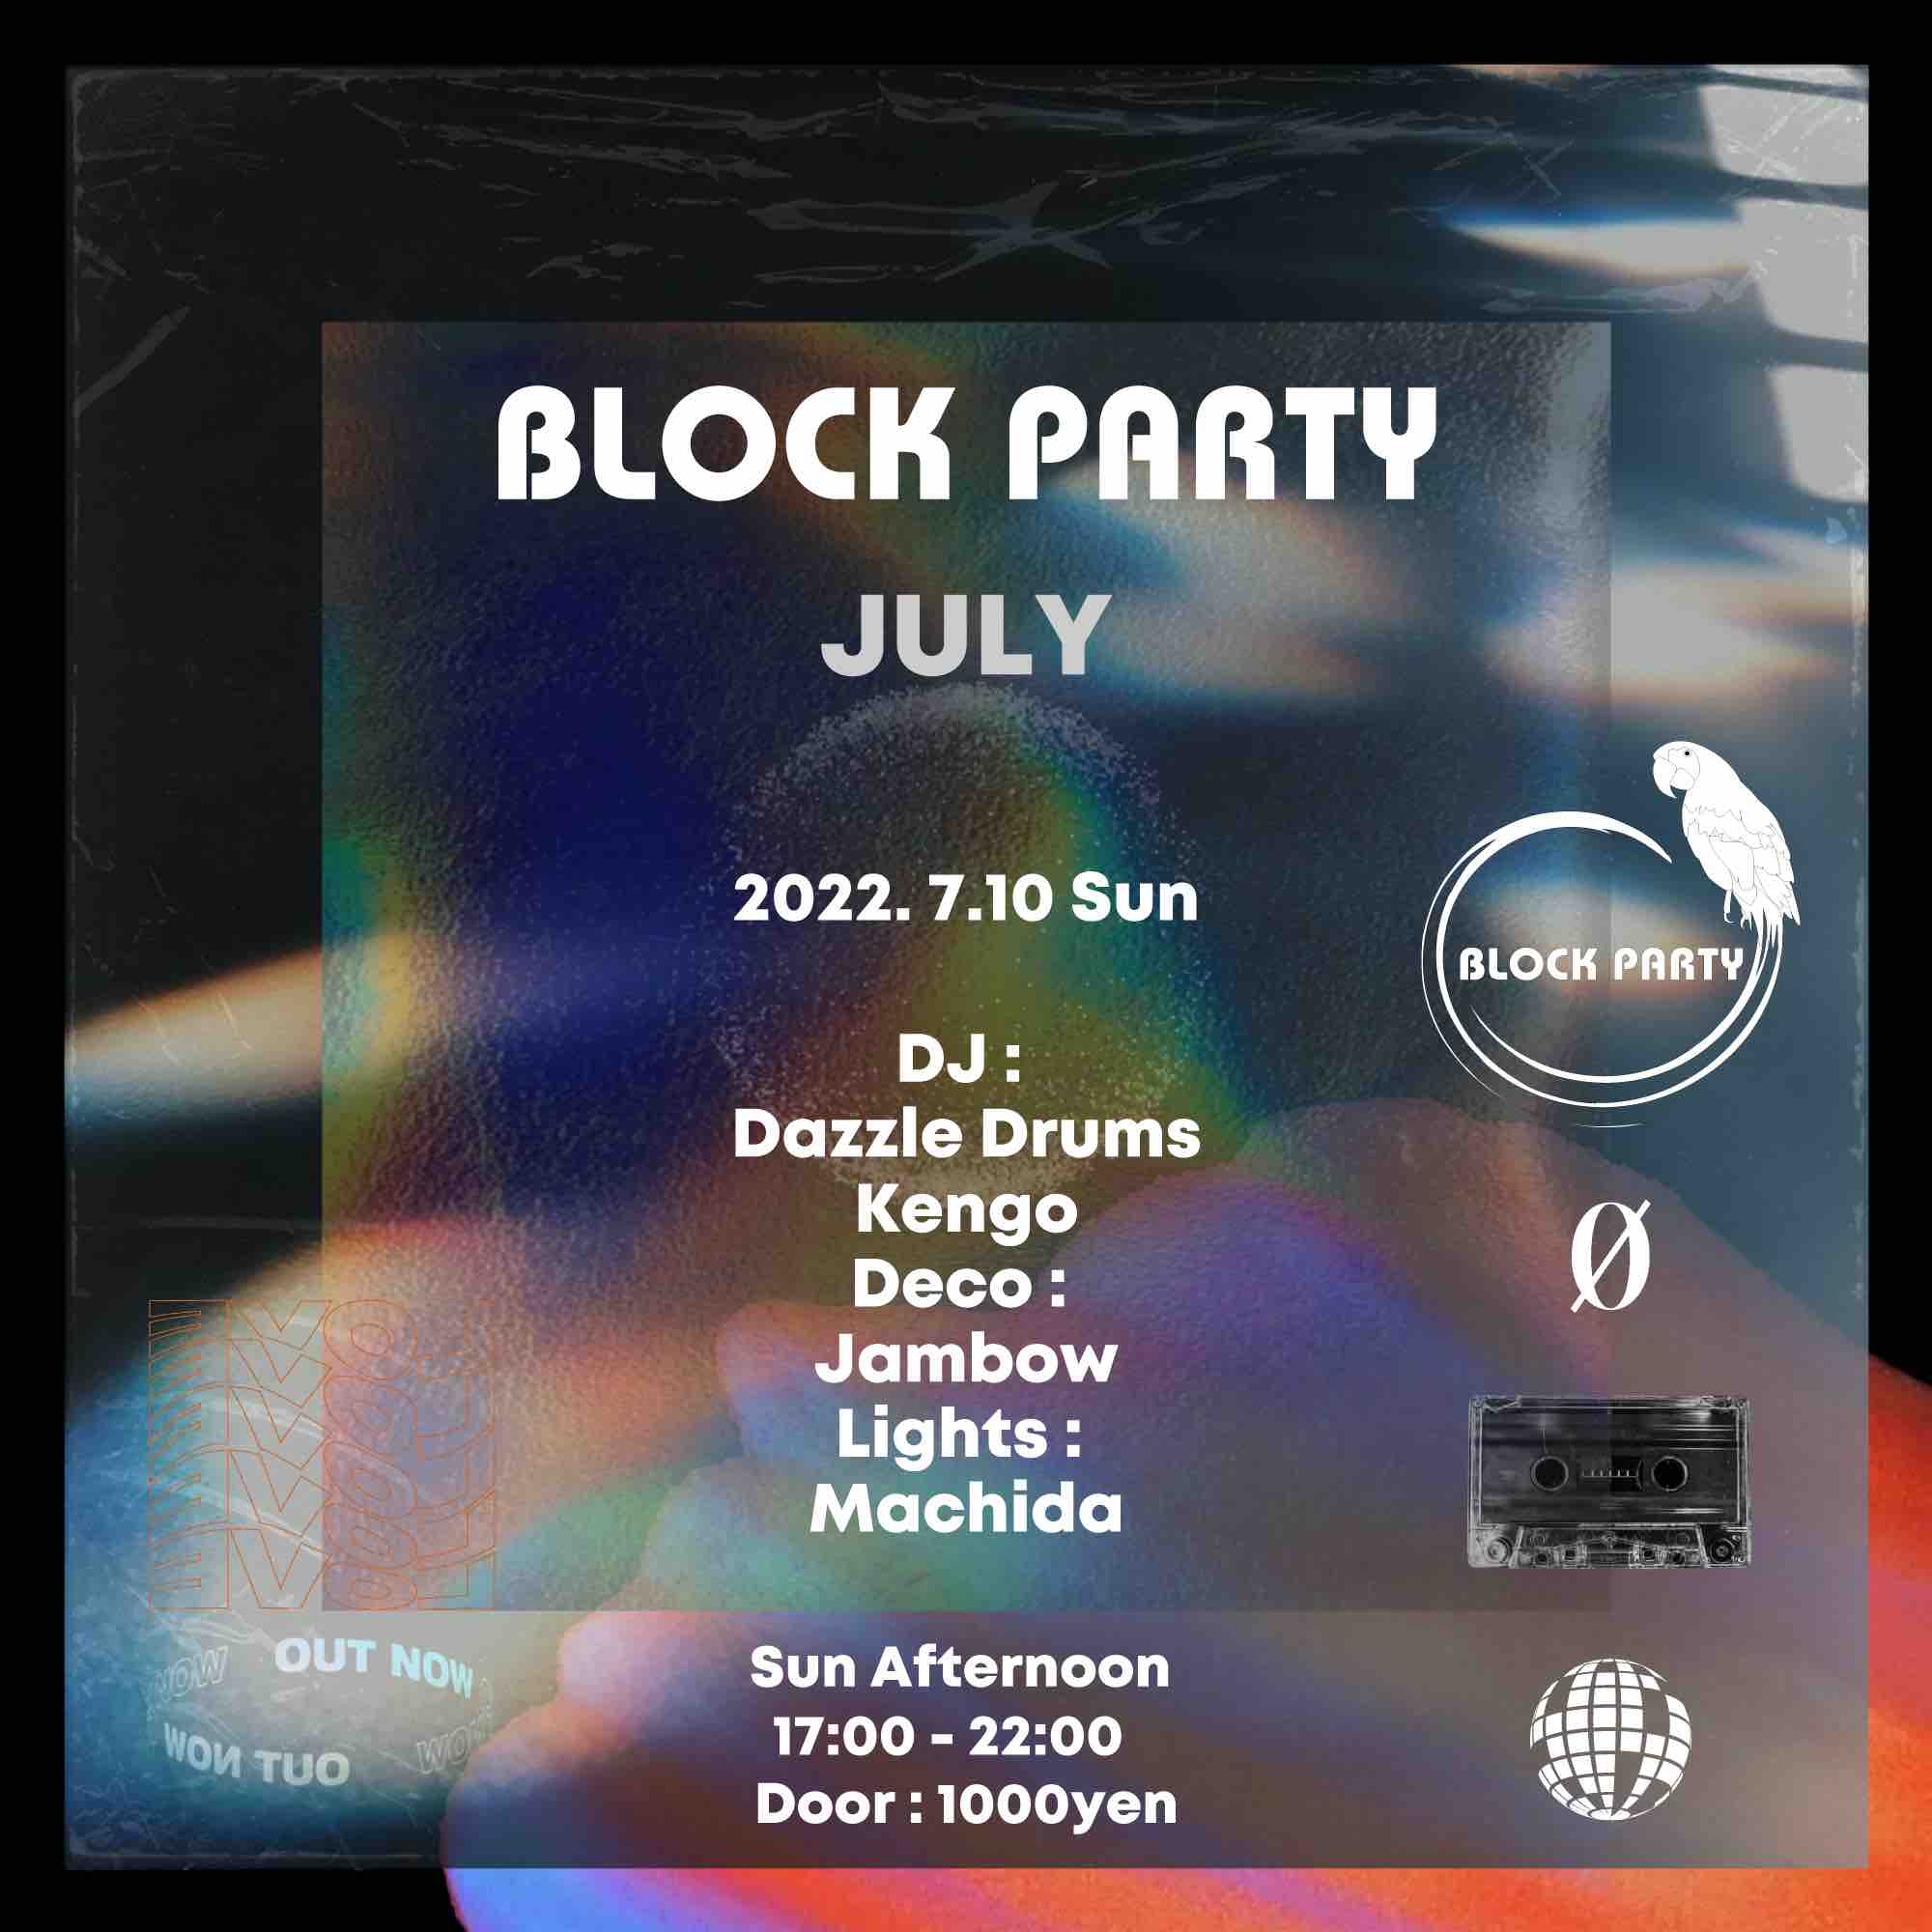 7.10.22 (Sun Afternoon) Block Party “July” @ 0 Zero